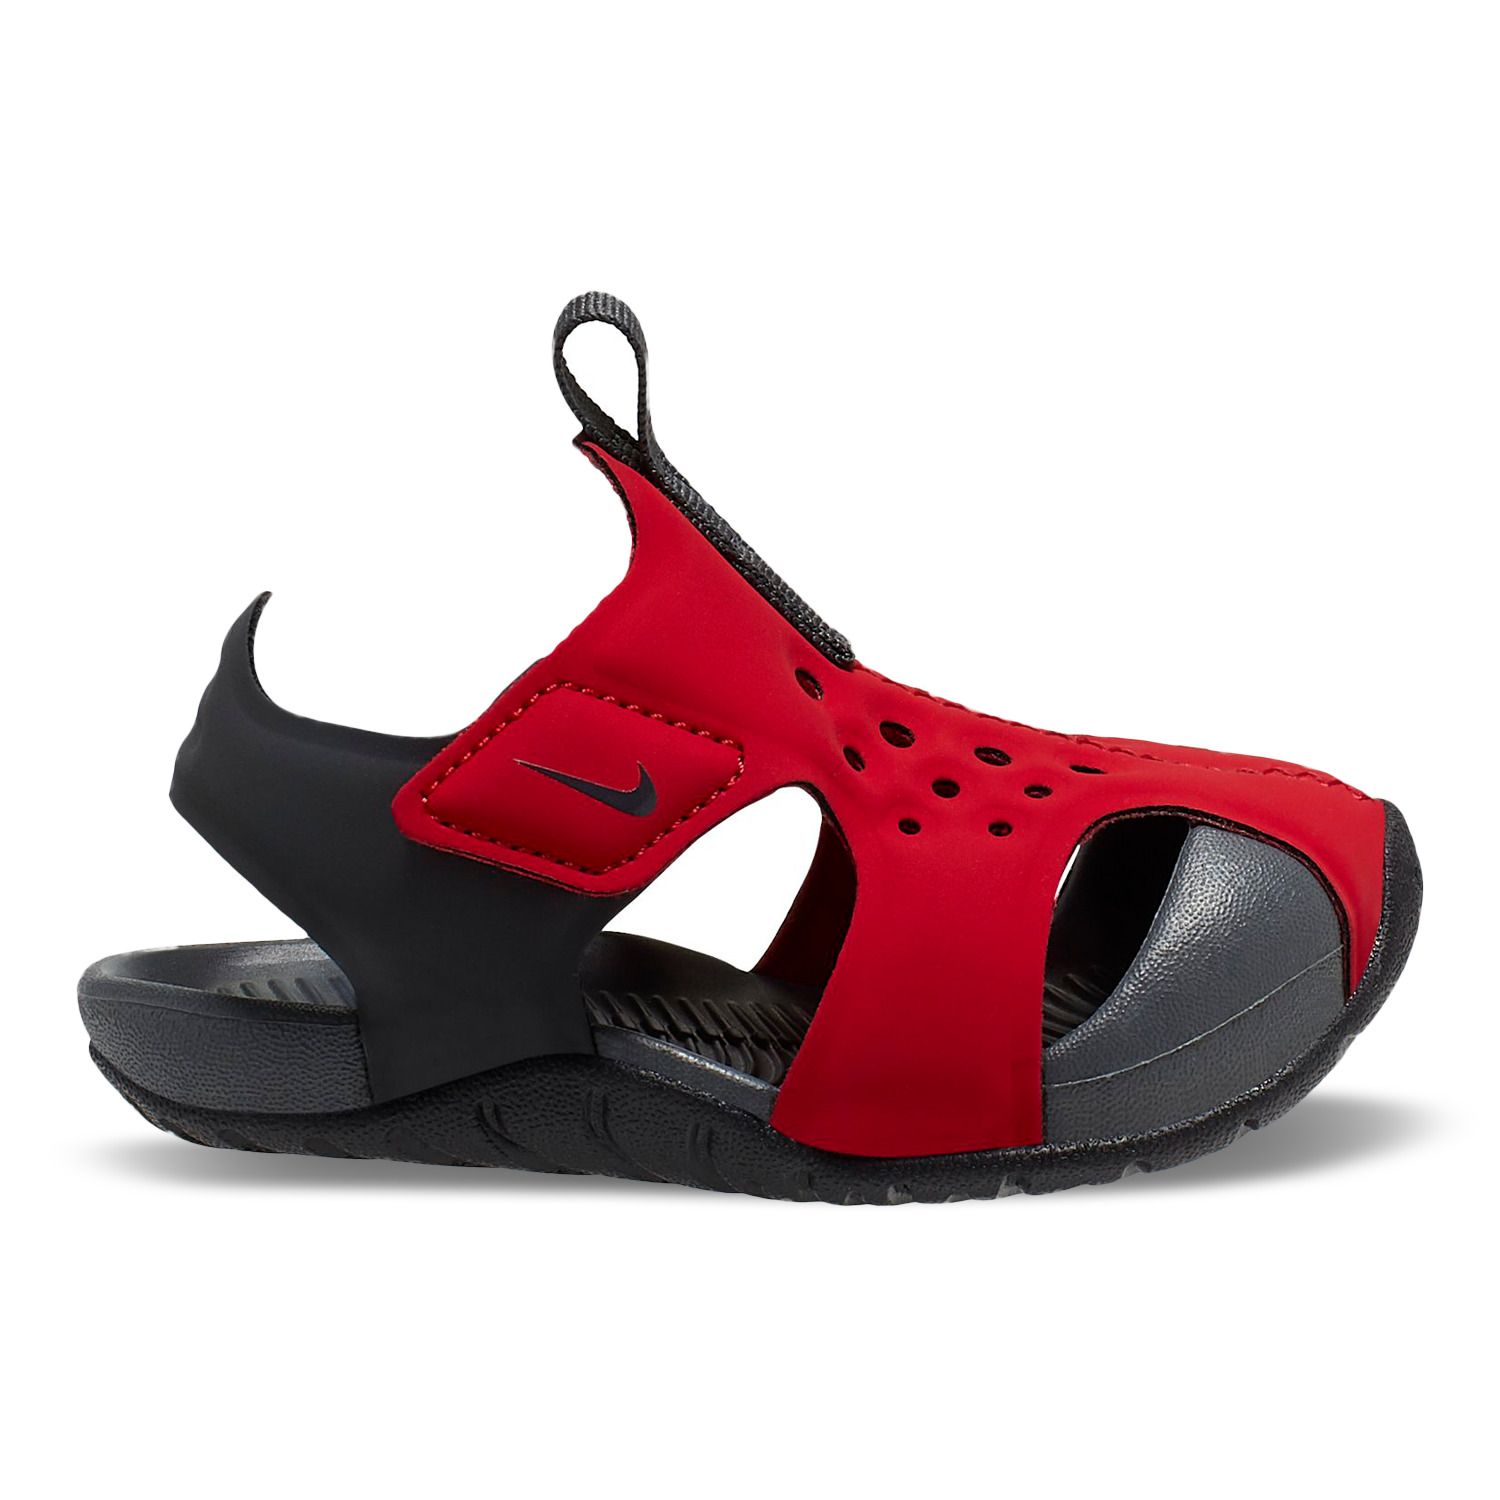 Red Sandals - Shoes | Kohl's